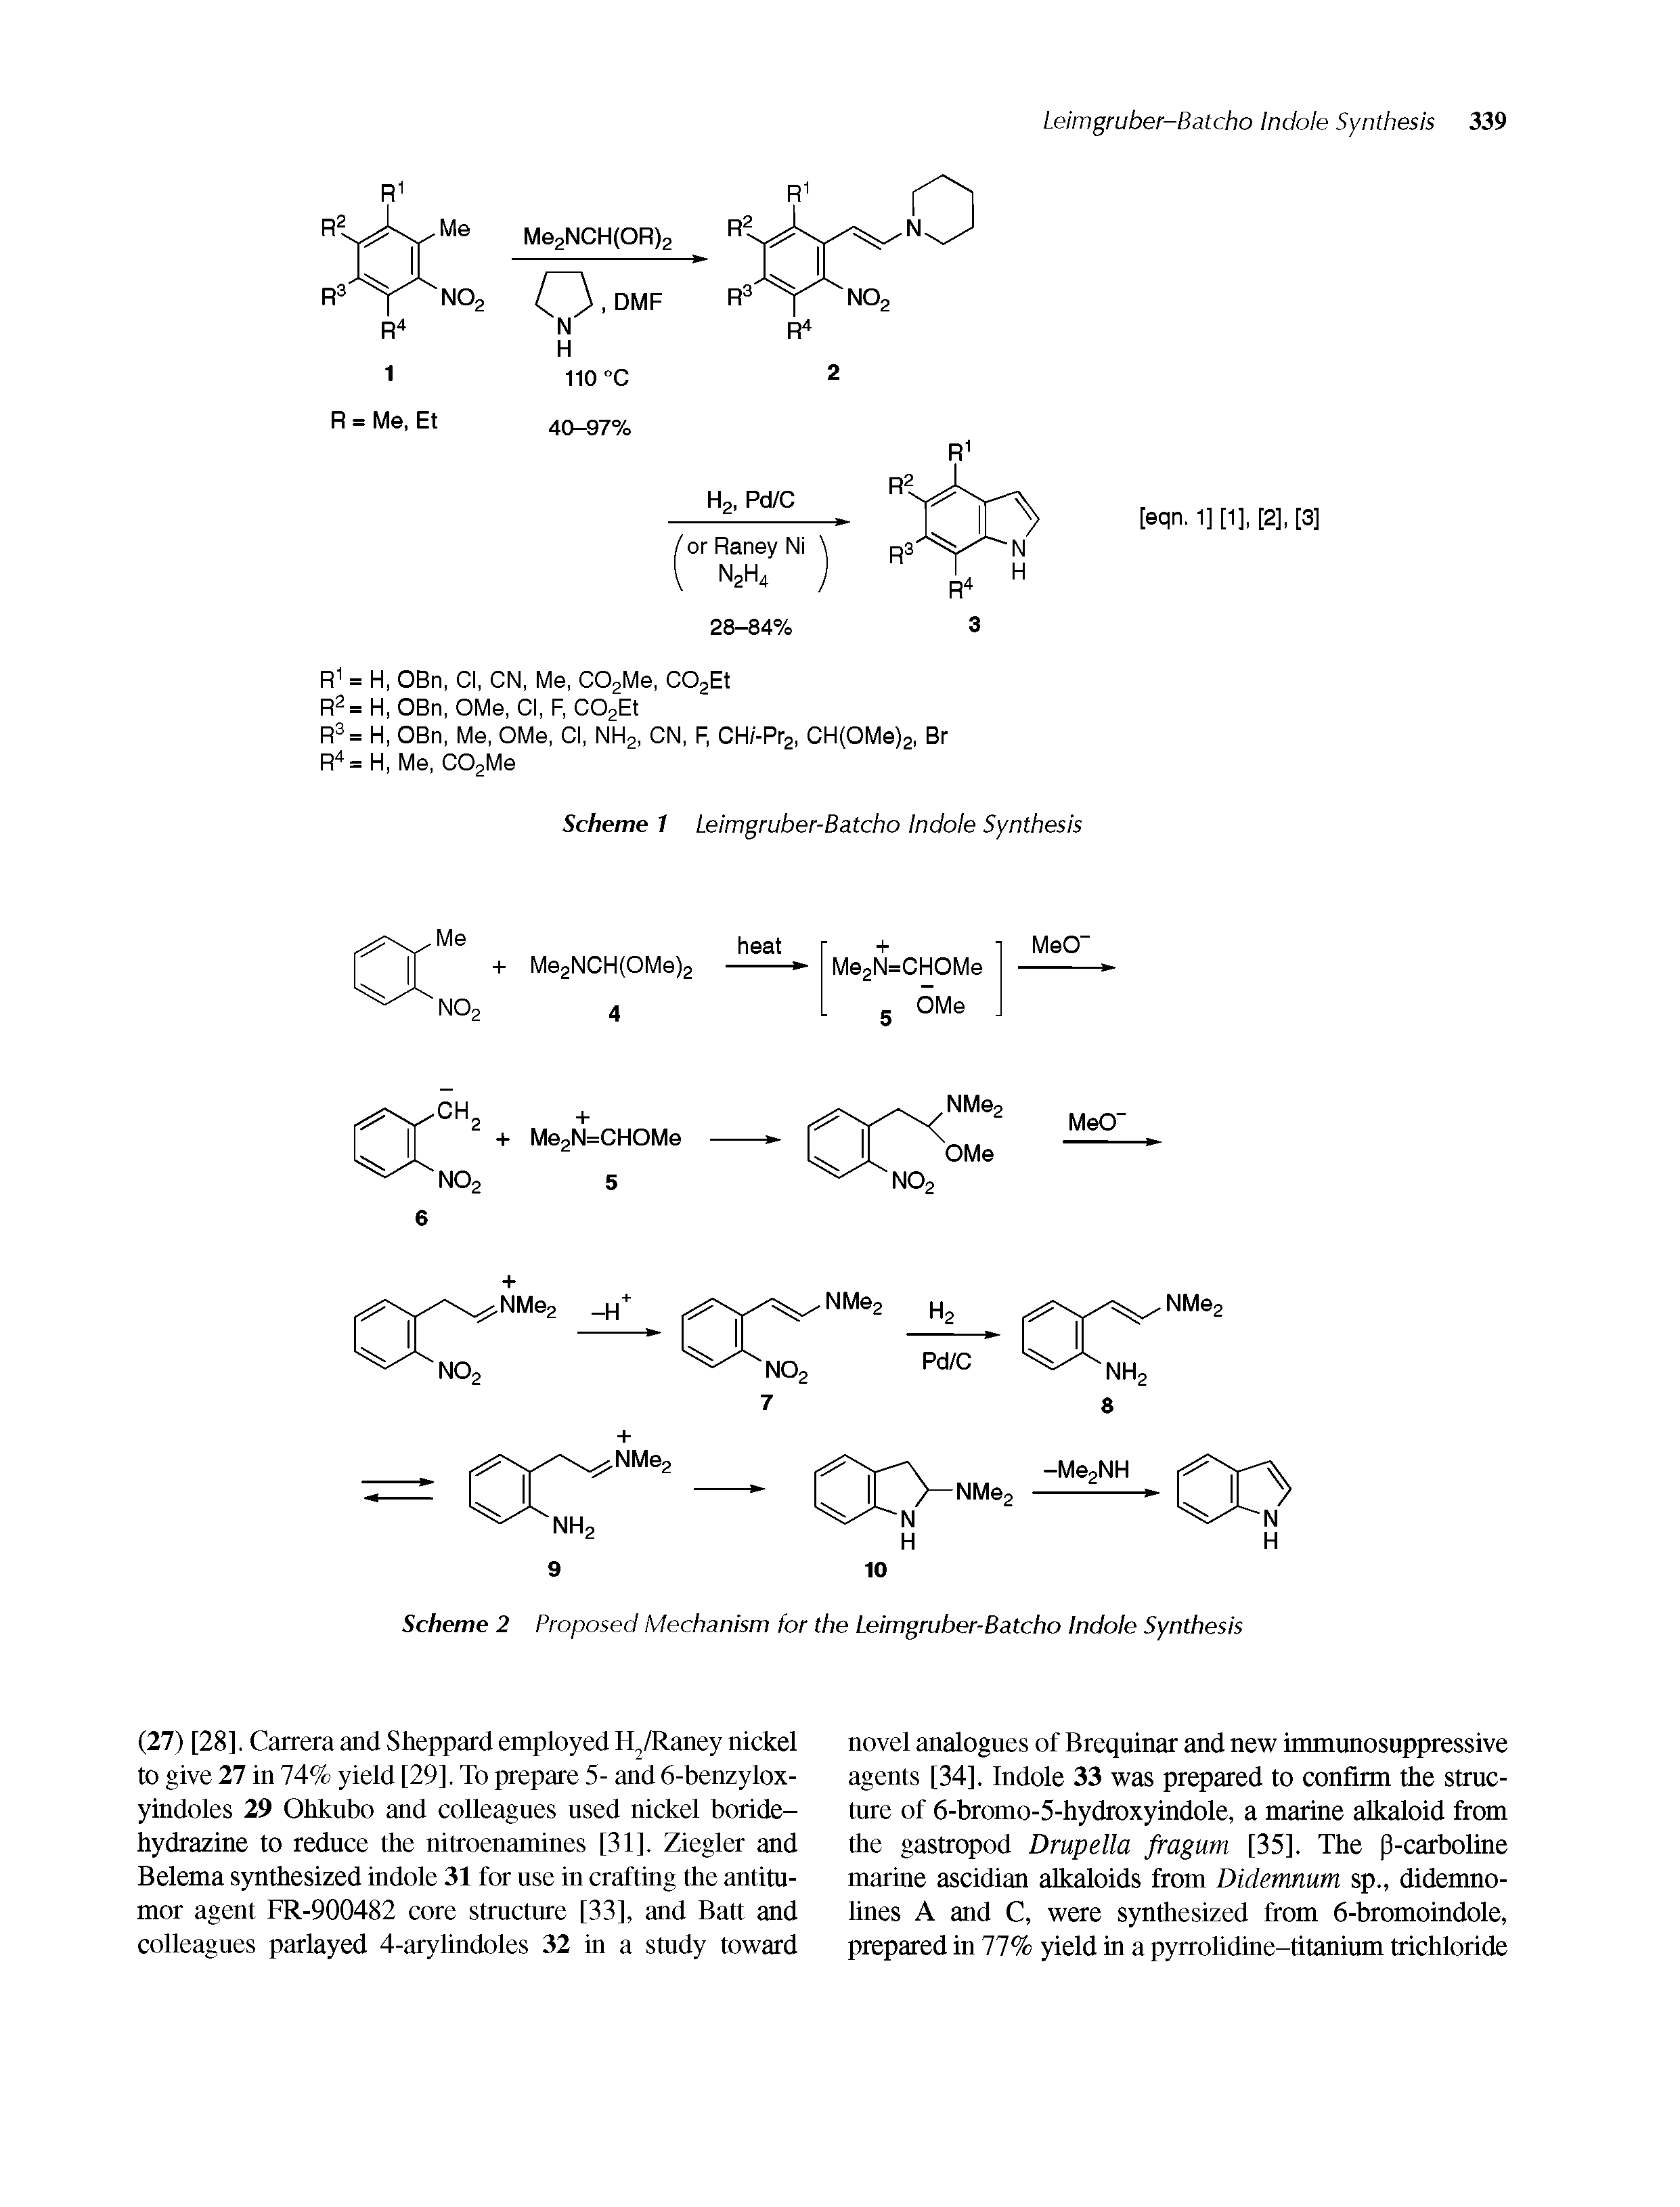 Scheme 2 Proposed Mechanism for the Leimgruber-Batcho Indole Synthesis...